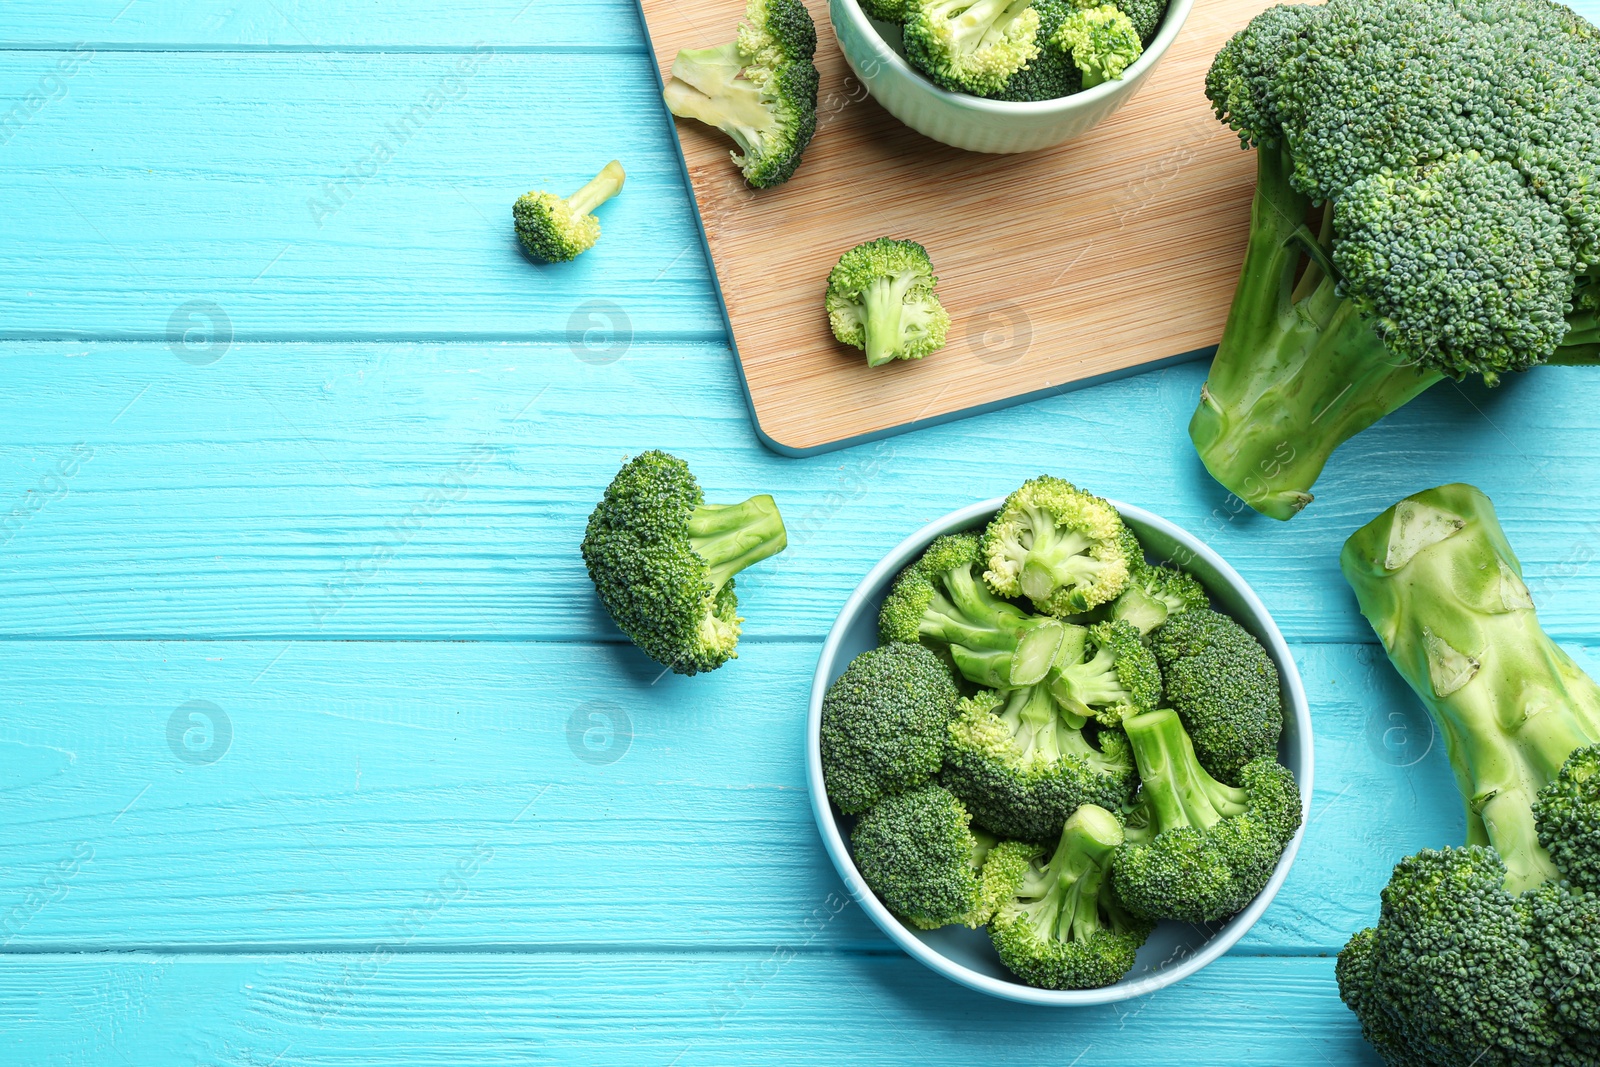 Photo of Flat lay composition of fresh green broccoli on blue wooden table, space for text